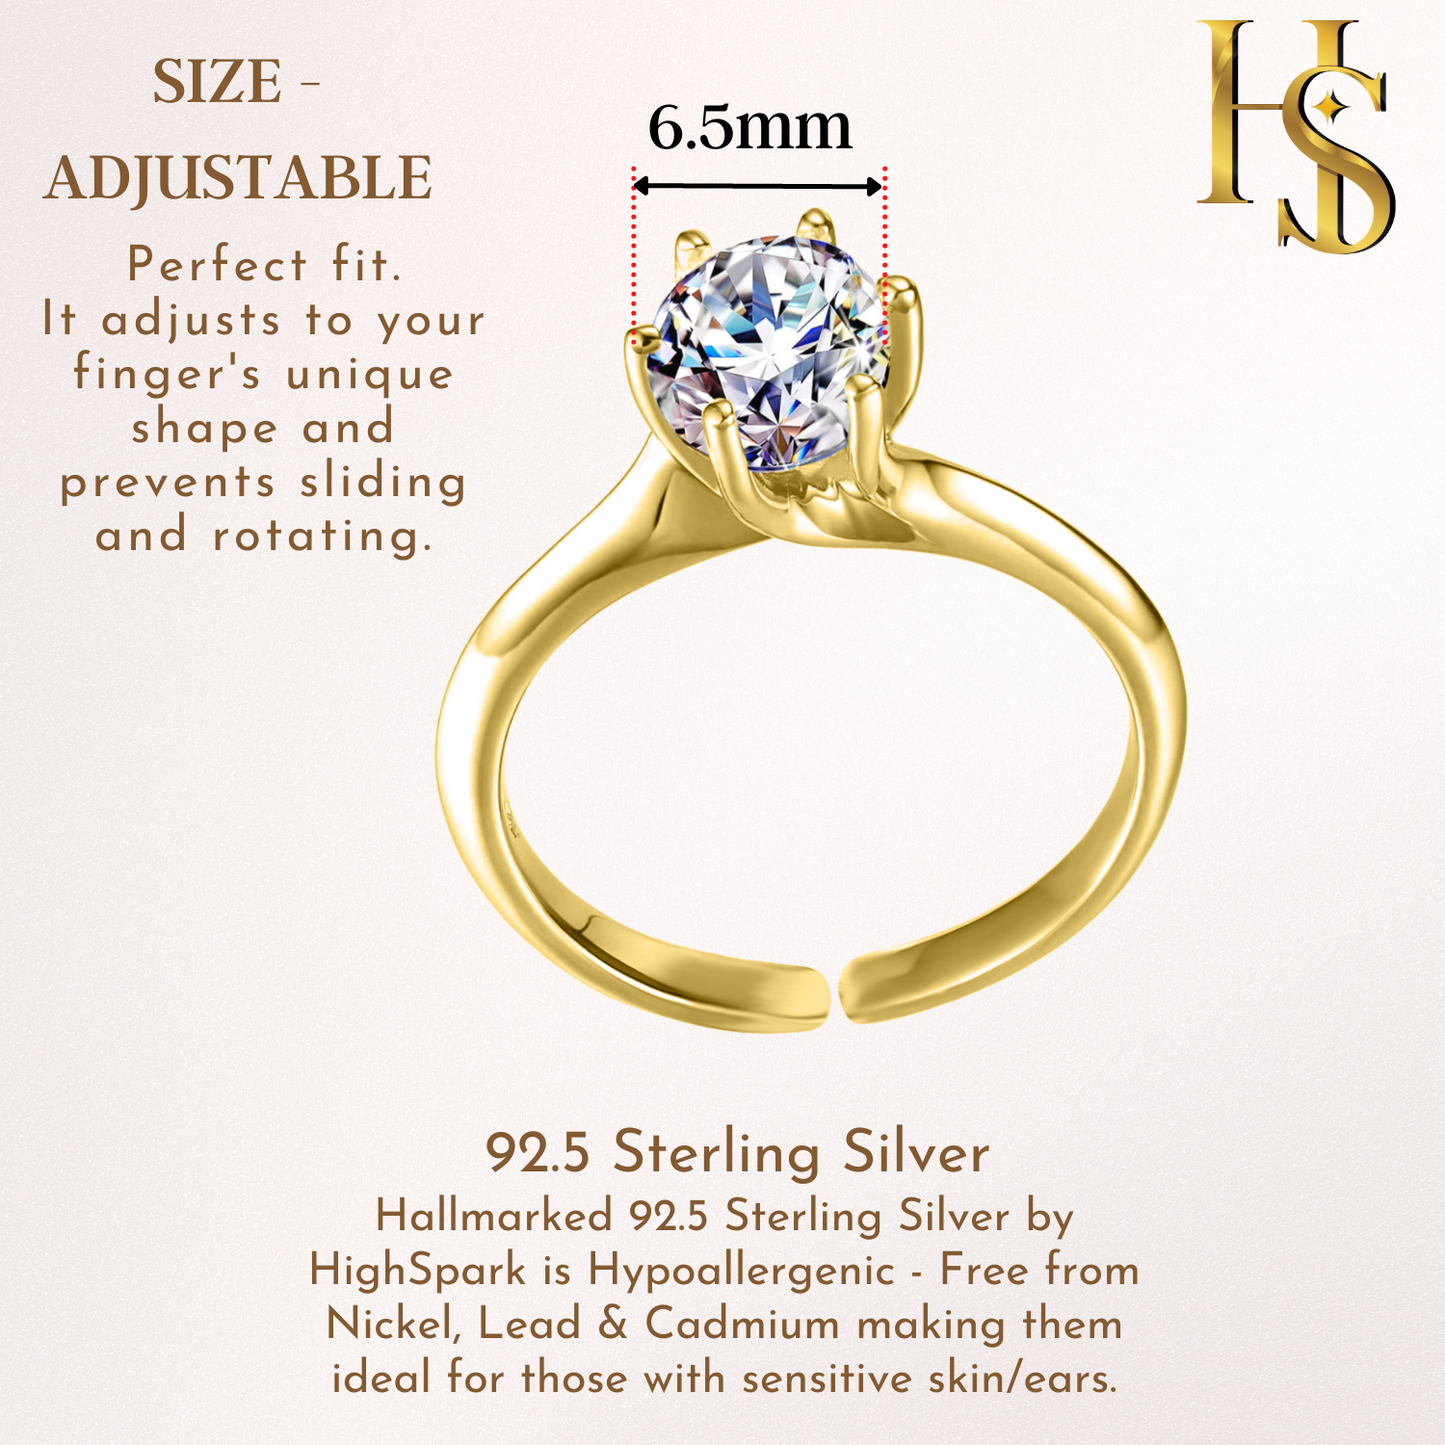 Gold Solitaire Adjustable Ring 'Sparkling Martini' for women in 92.5 Silver